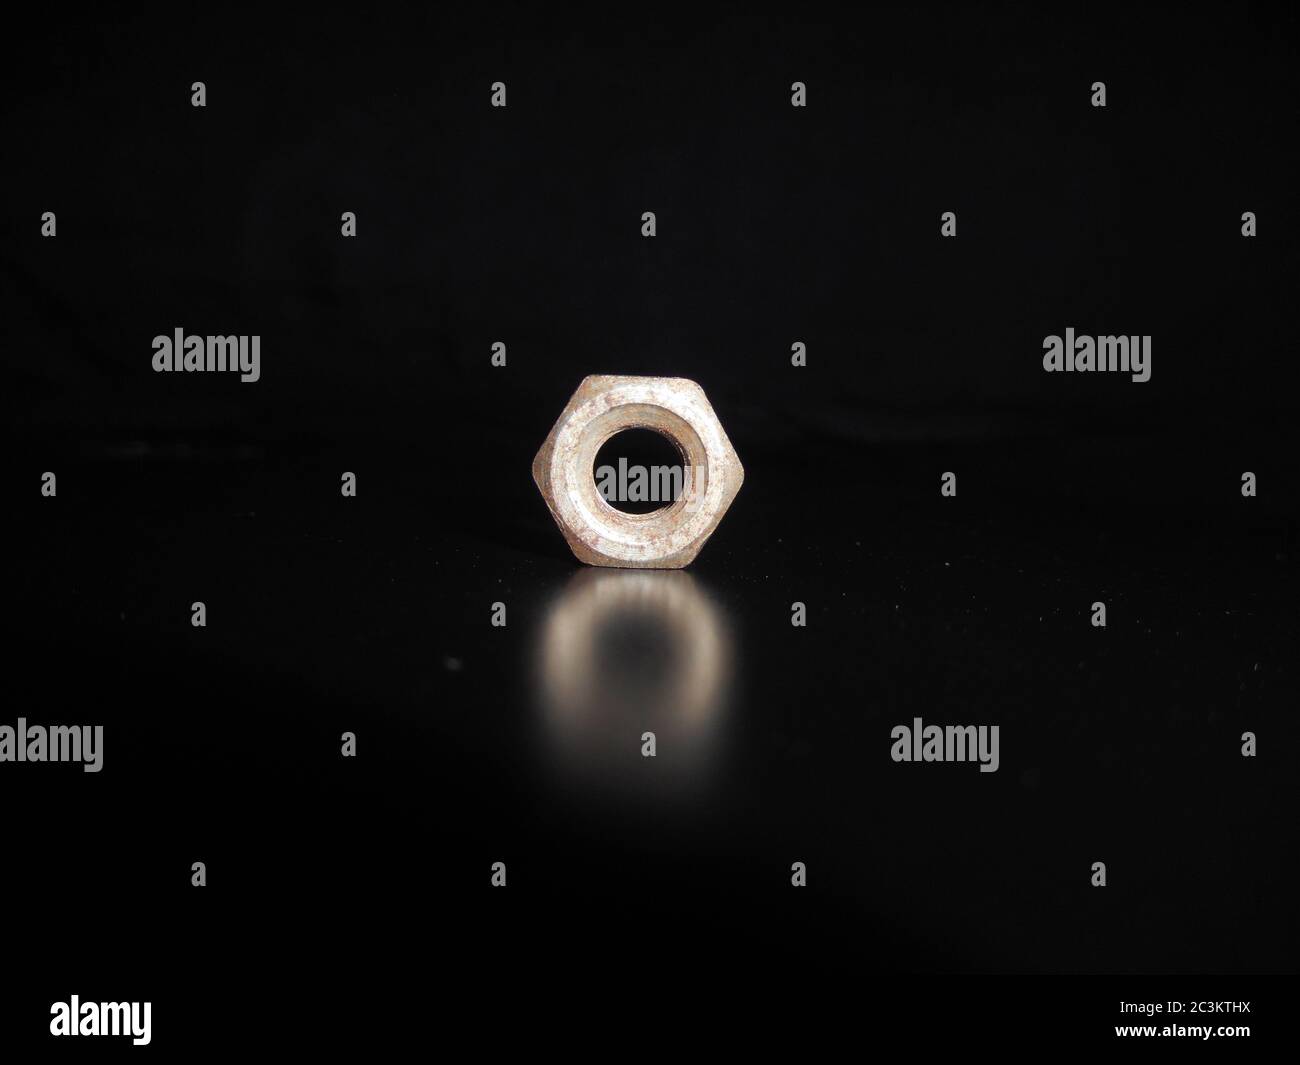 Metal nut or bolt isolated on black background. Stock Photo